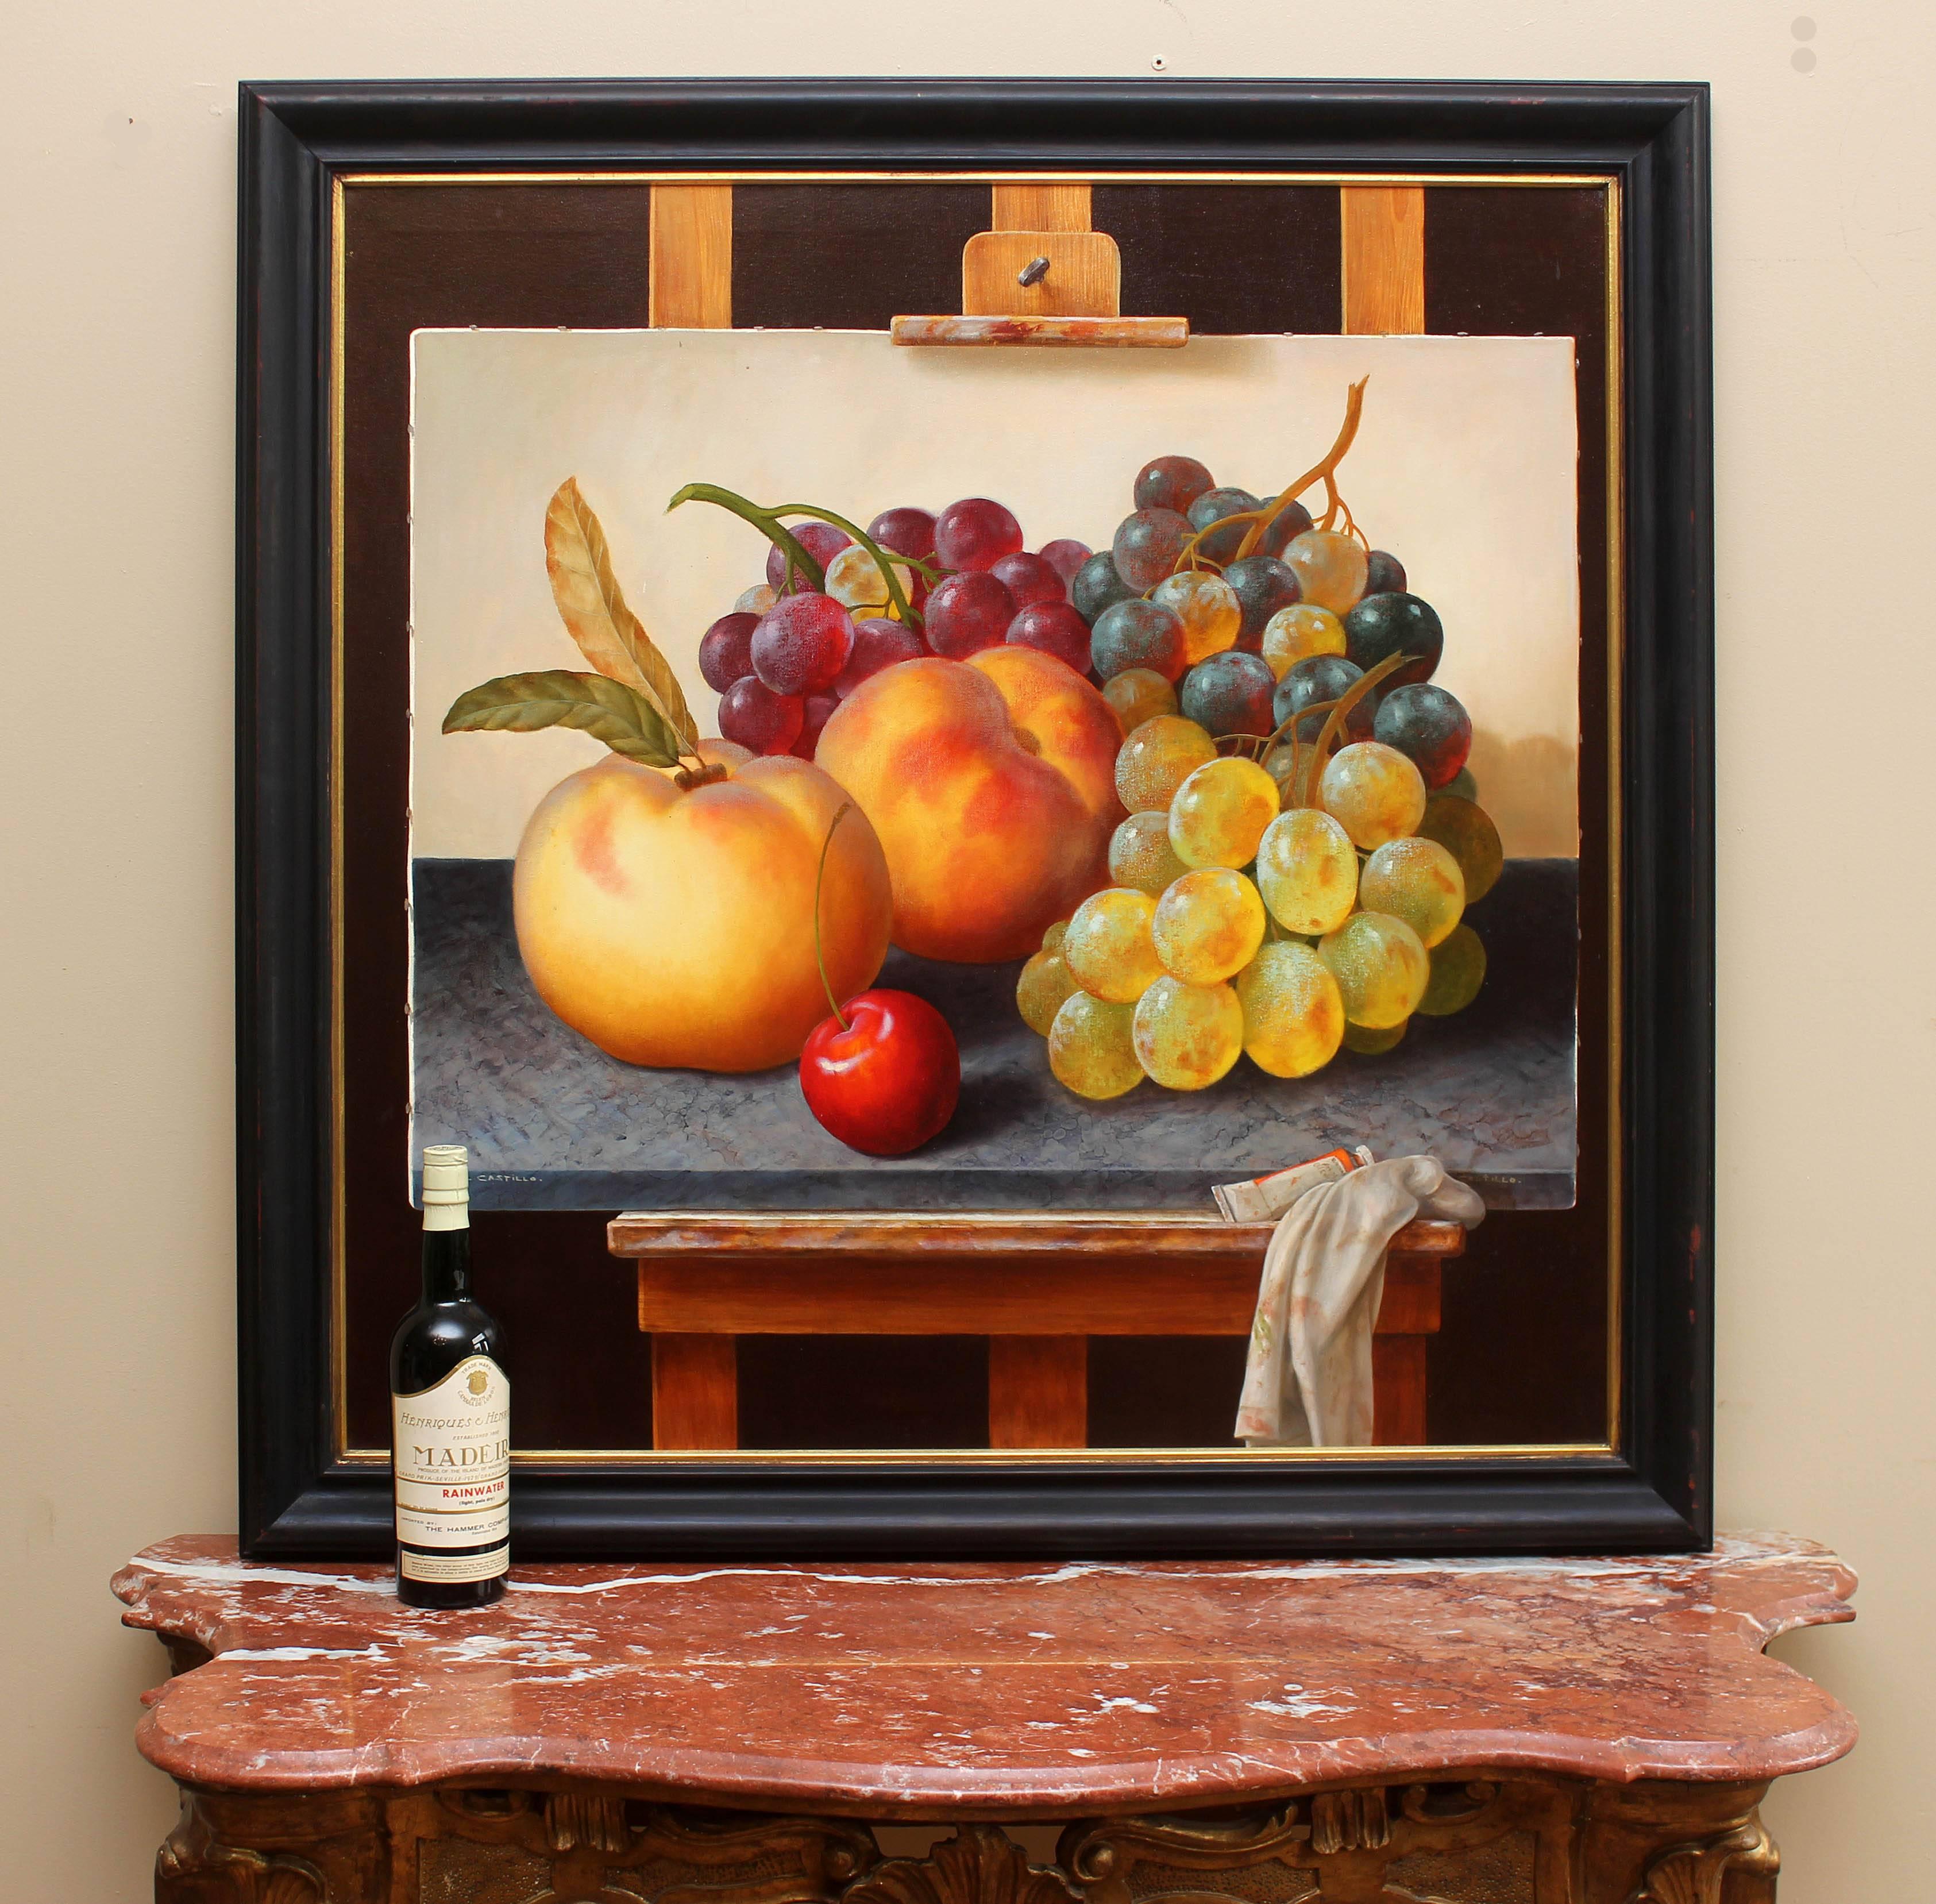 Surreal hyperrealistic trompe l'oeil oil painting by Latin American artist Victor Del Castillo. Peaches, grapes and cherries in rich brilliant colors and incredible detail. Large 41